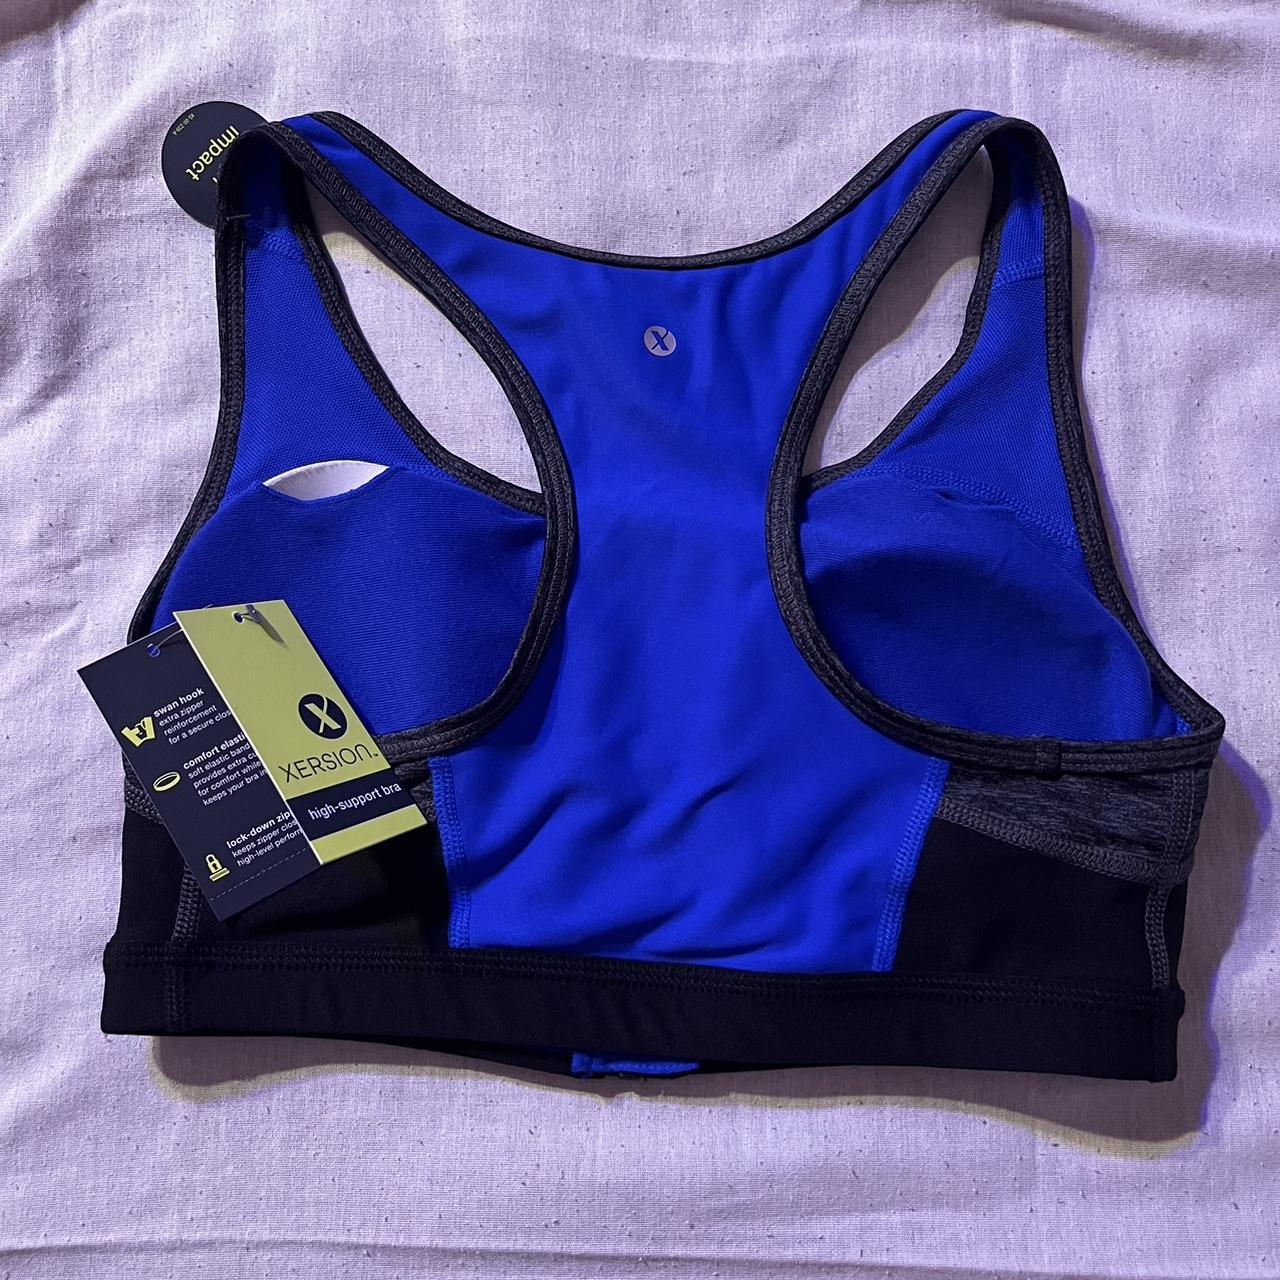 xersion blue and black high support sports bra size - Depop